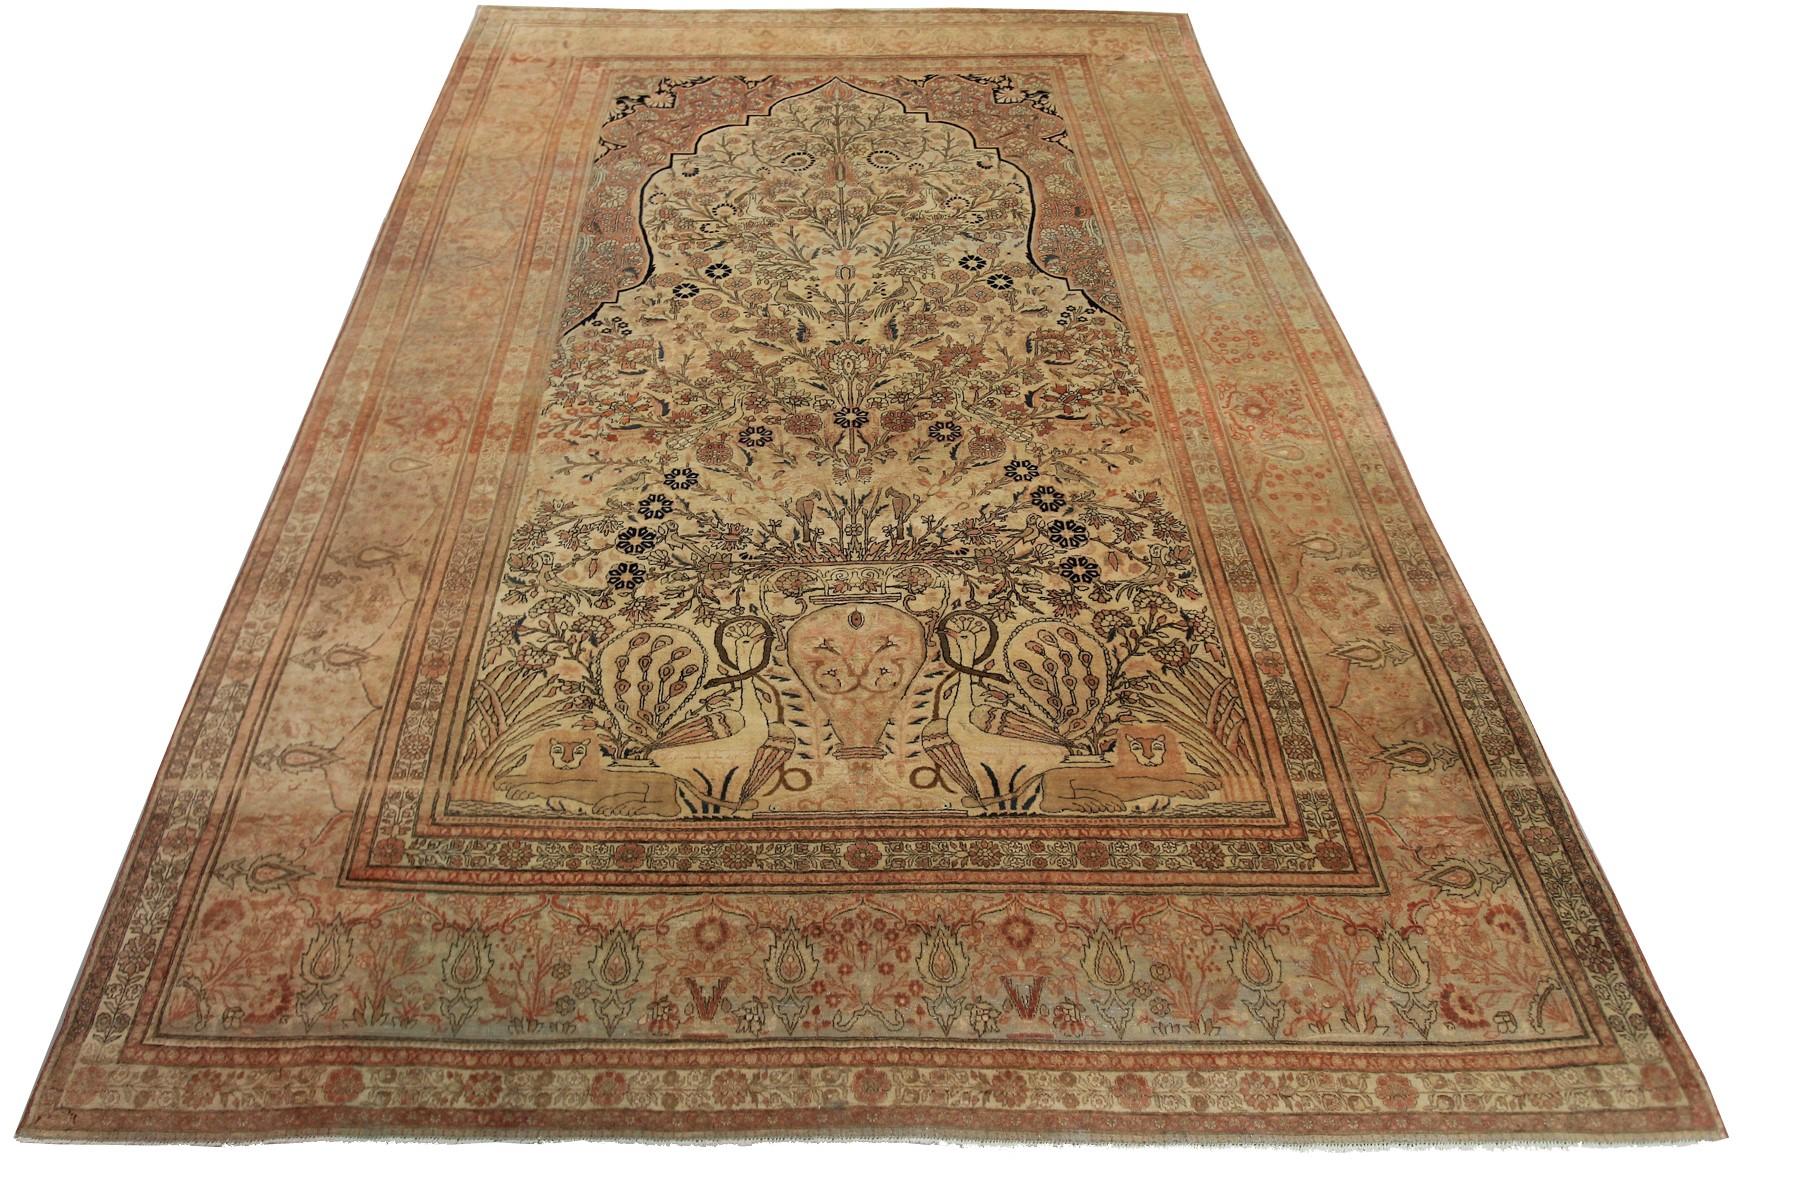 1870 Antique Silk Mohtasham Kashan Persian Mohtasham Rug 100% Silk Lion In Excellent Condition For Sale In New York, NY